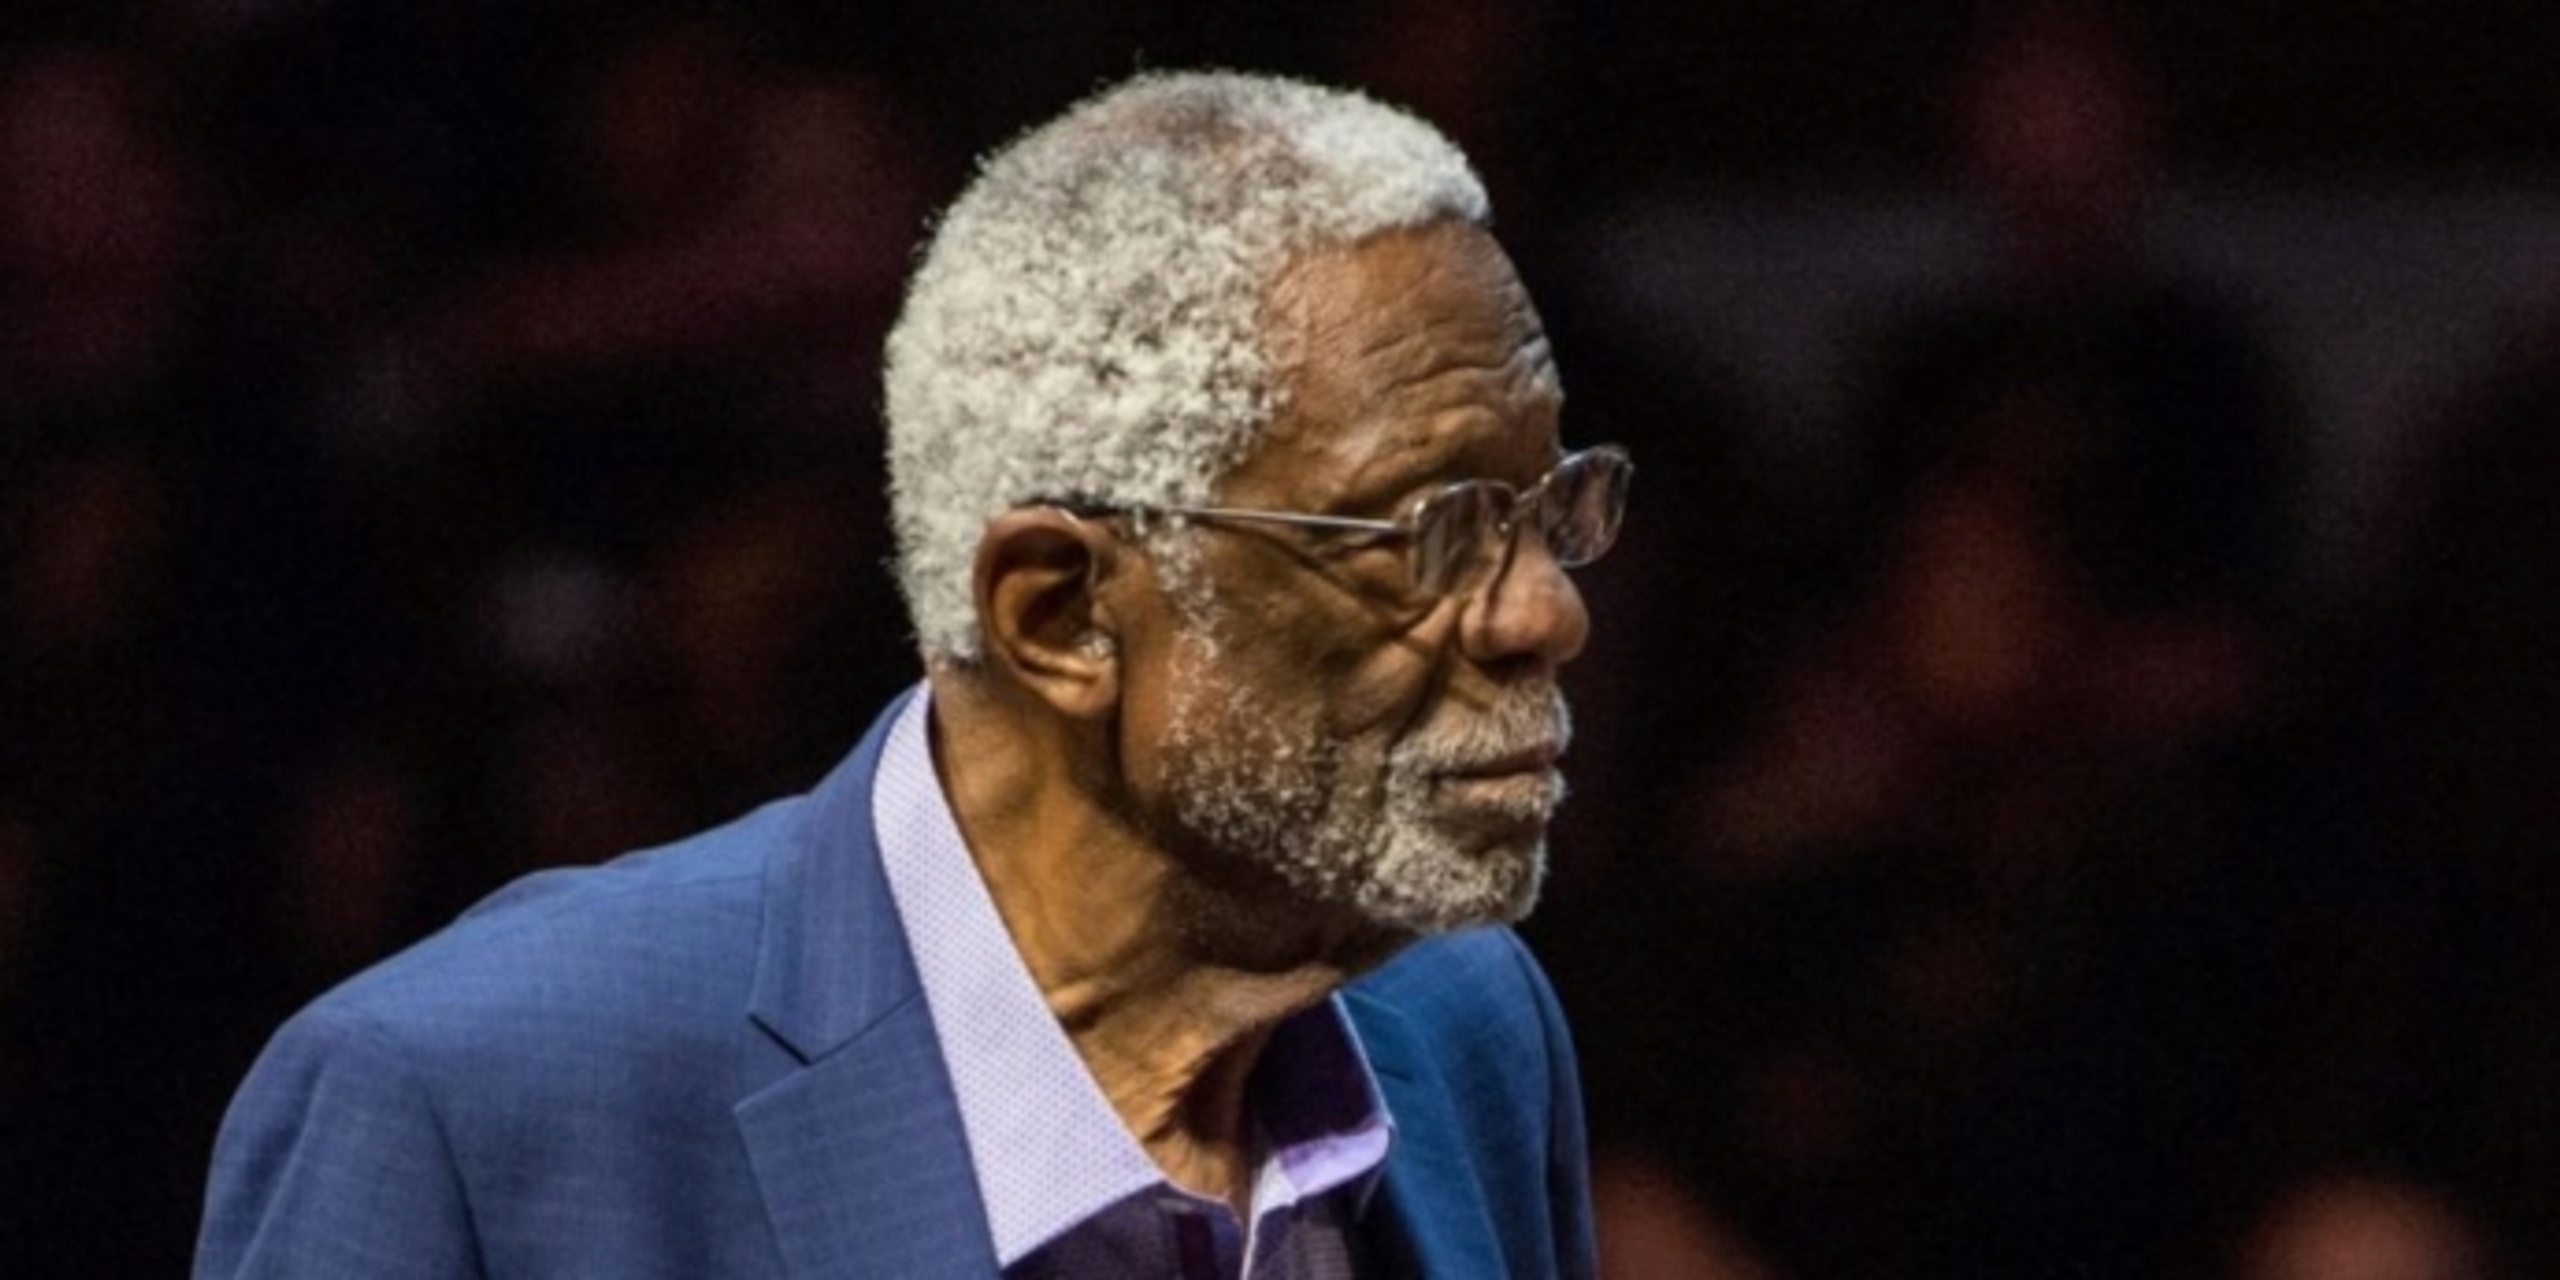 Netflix will release a documentary about eleven-time NBA champion Bill Russell